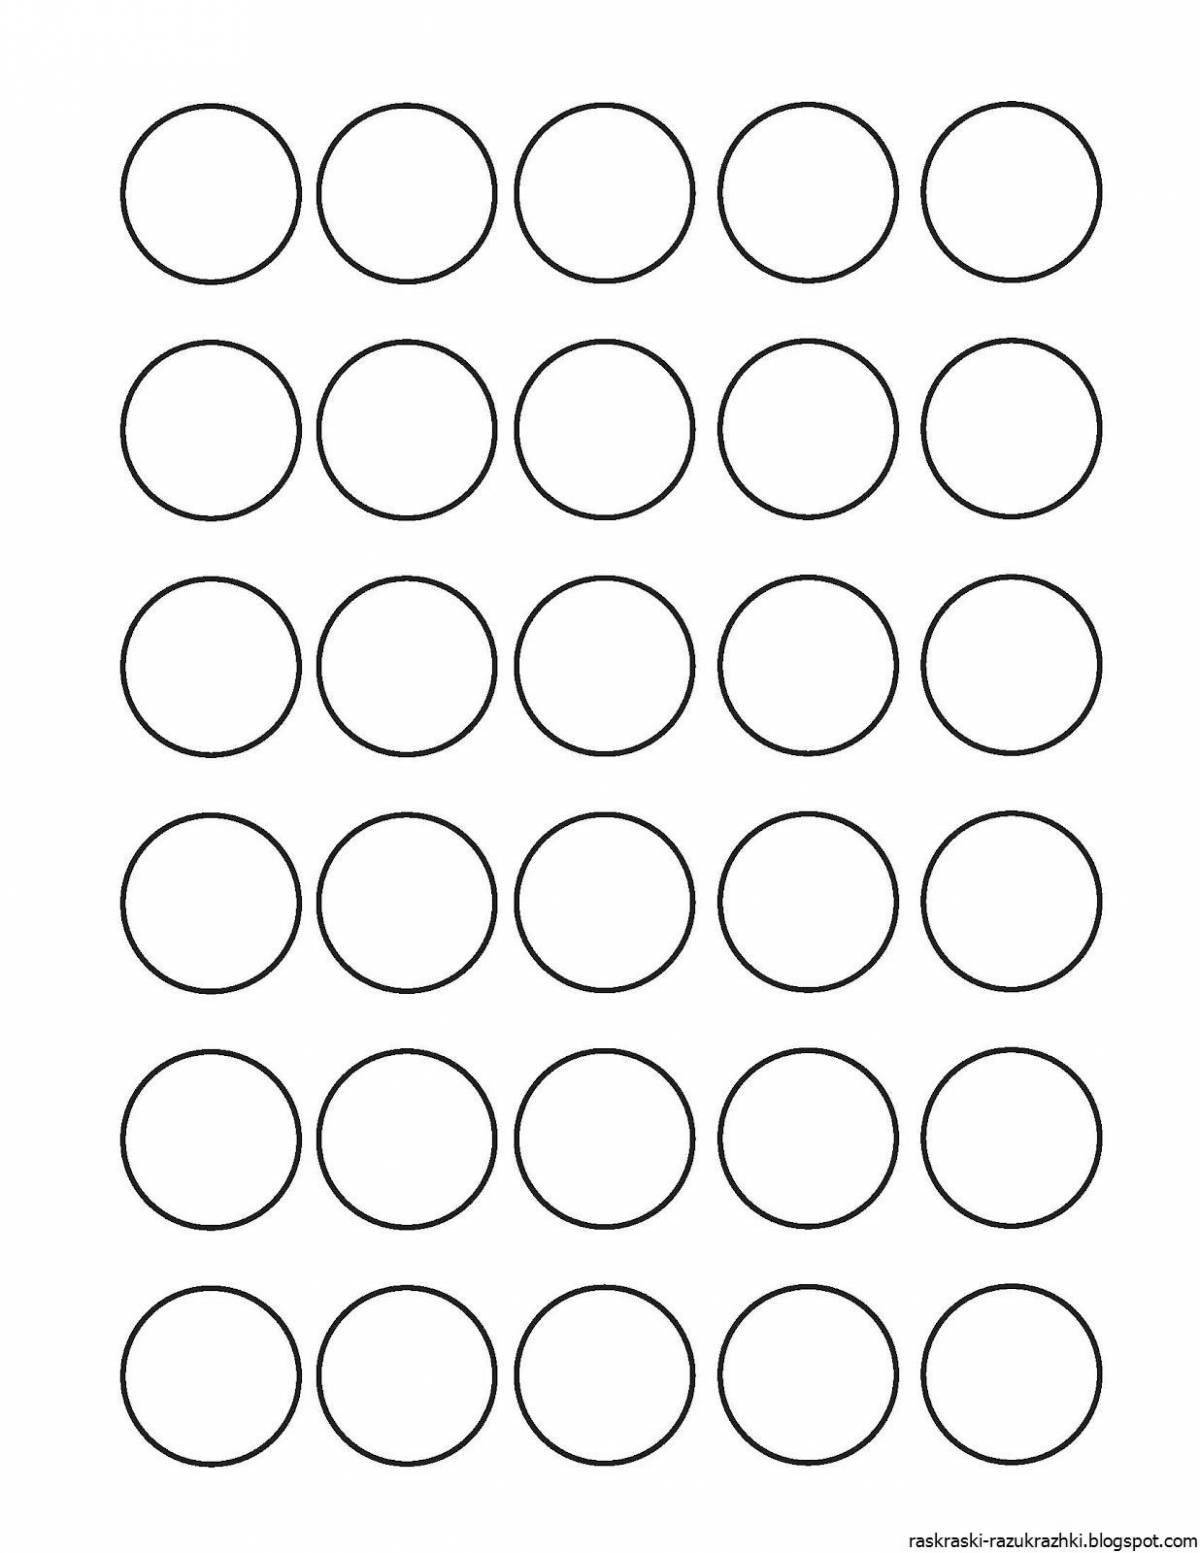 Coloring page with intricate circular pattern